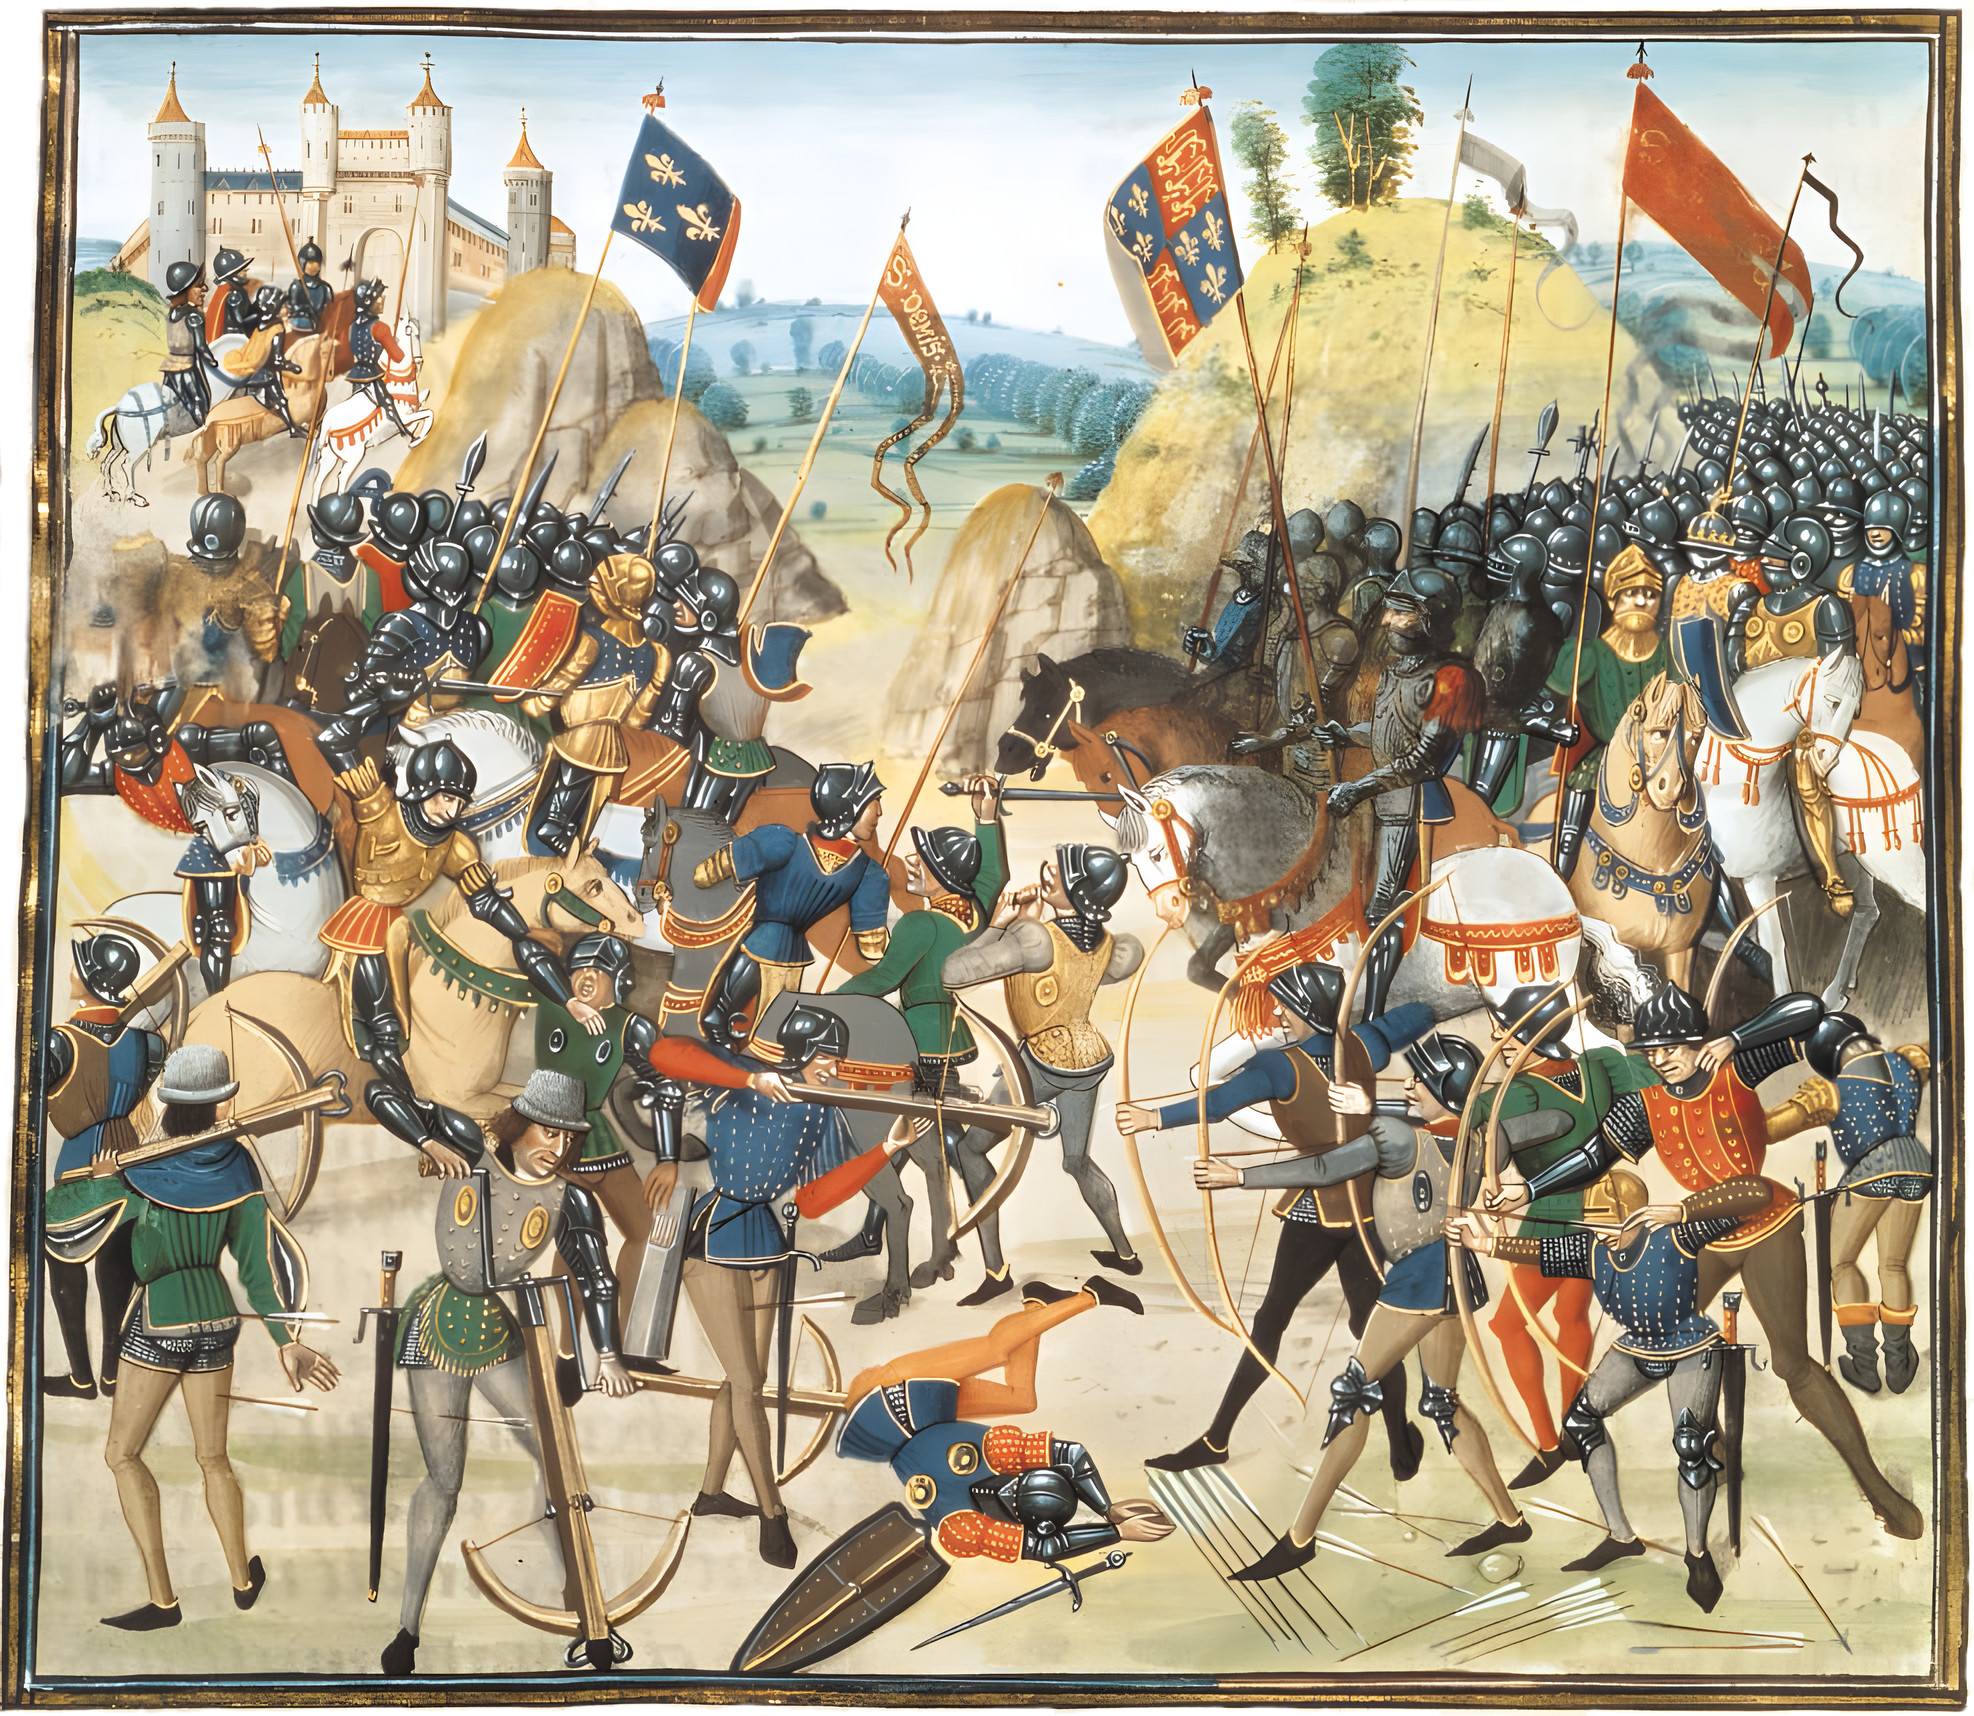 A color print from Jean Froissart’s Chronicles, a description of western Europe from 1327 to 1400 composed in the late 1400s, shows Genoese crossbowmen squaring off against English longbowmen at Crécy in 1346. Mounted knights await their turn to clash in the thunderous battle. 